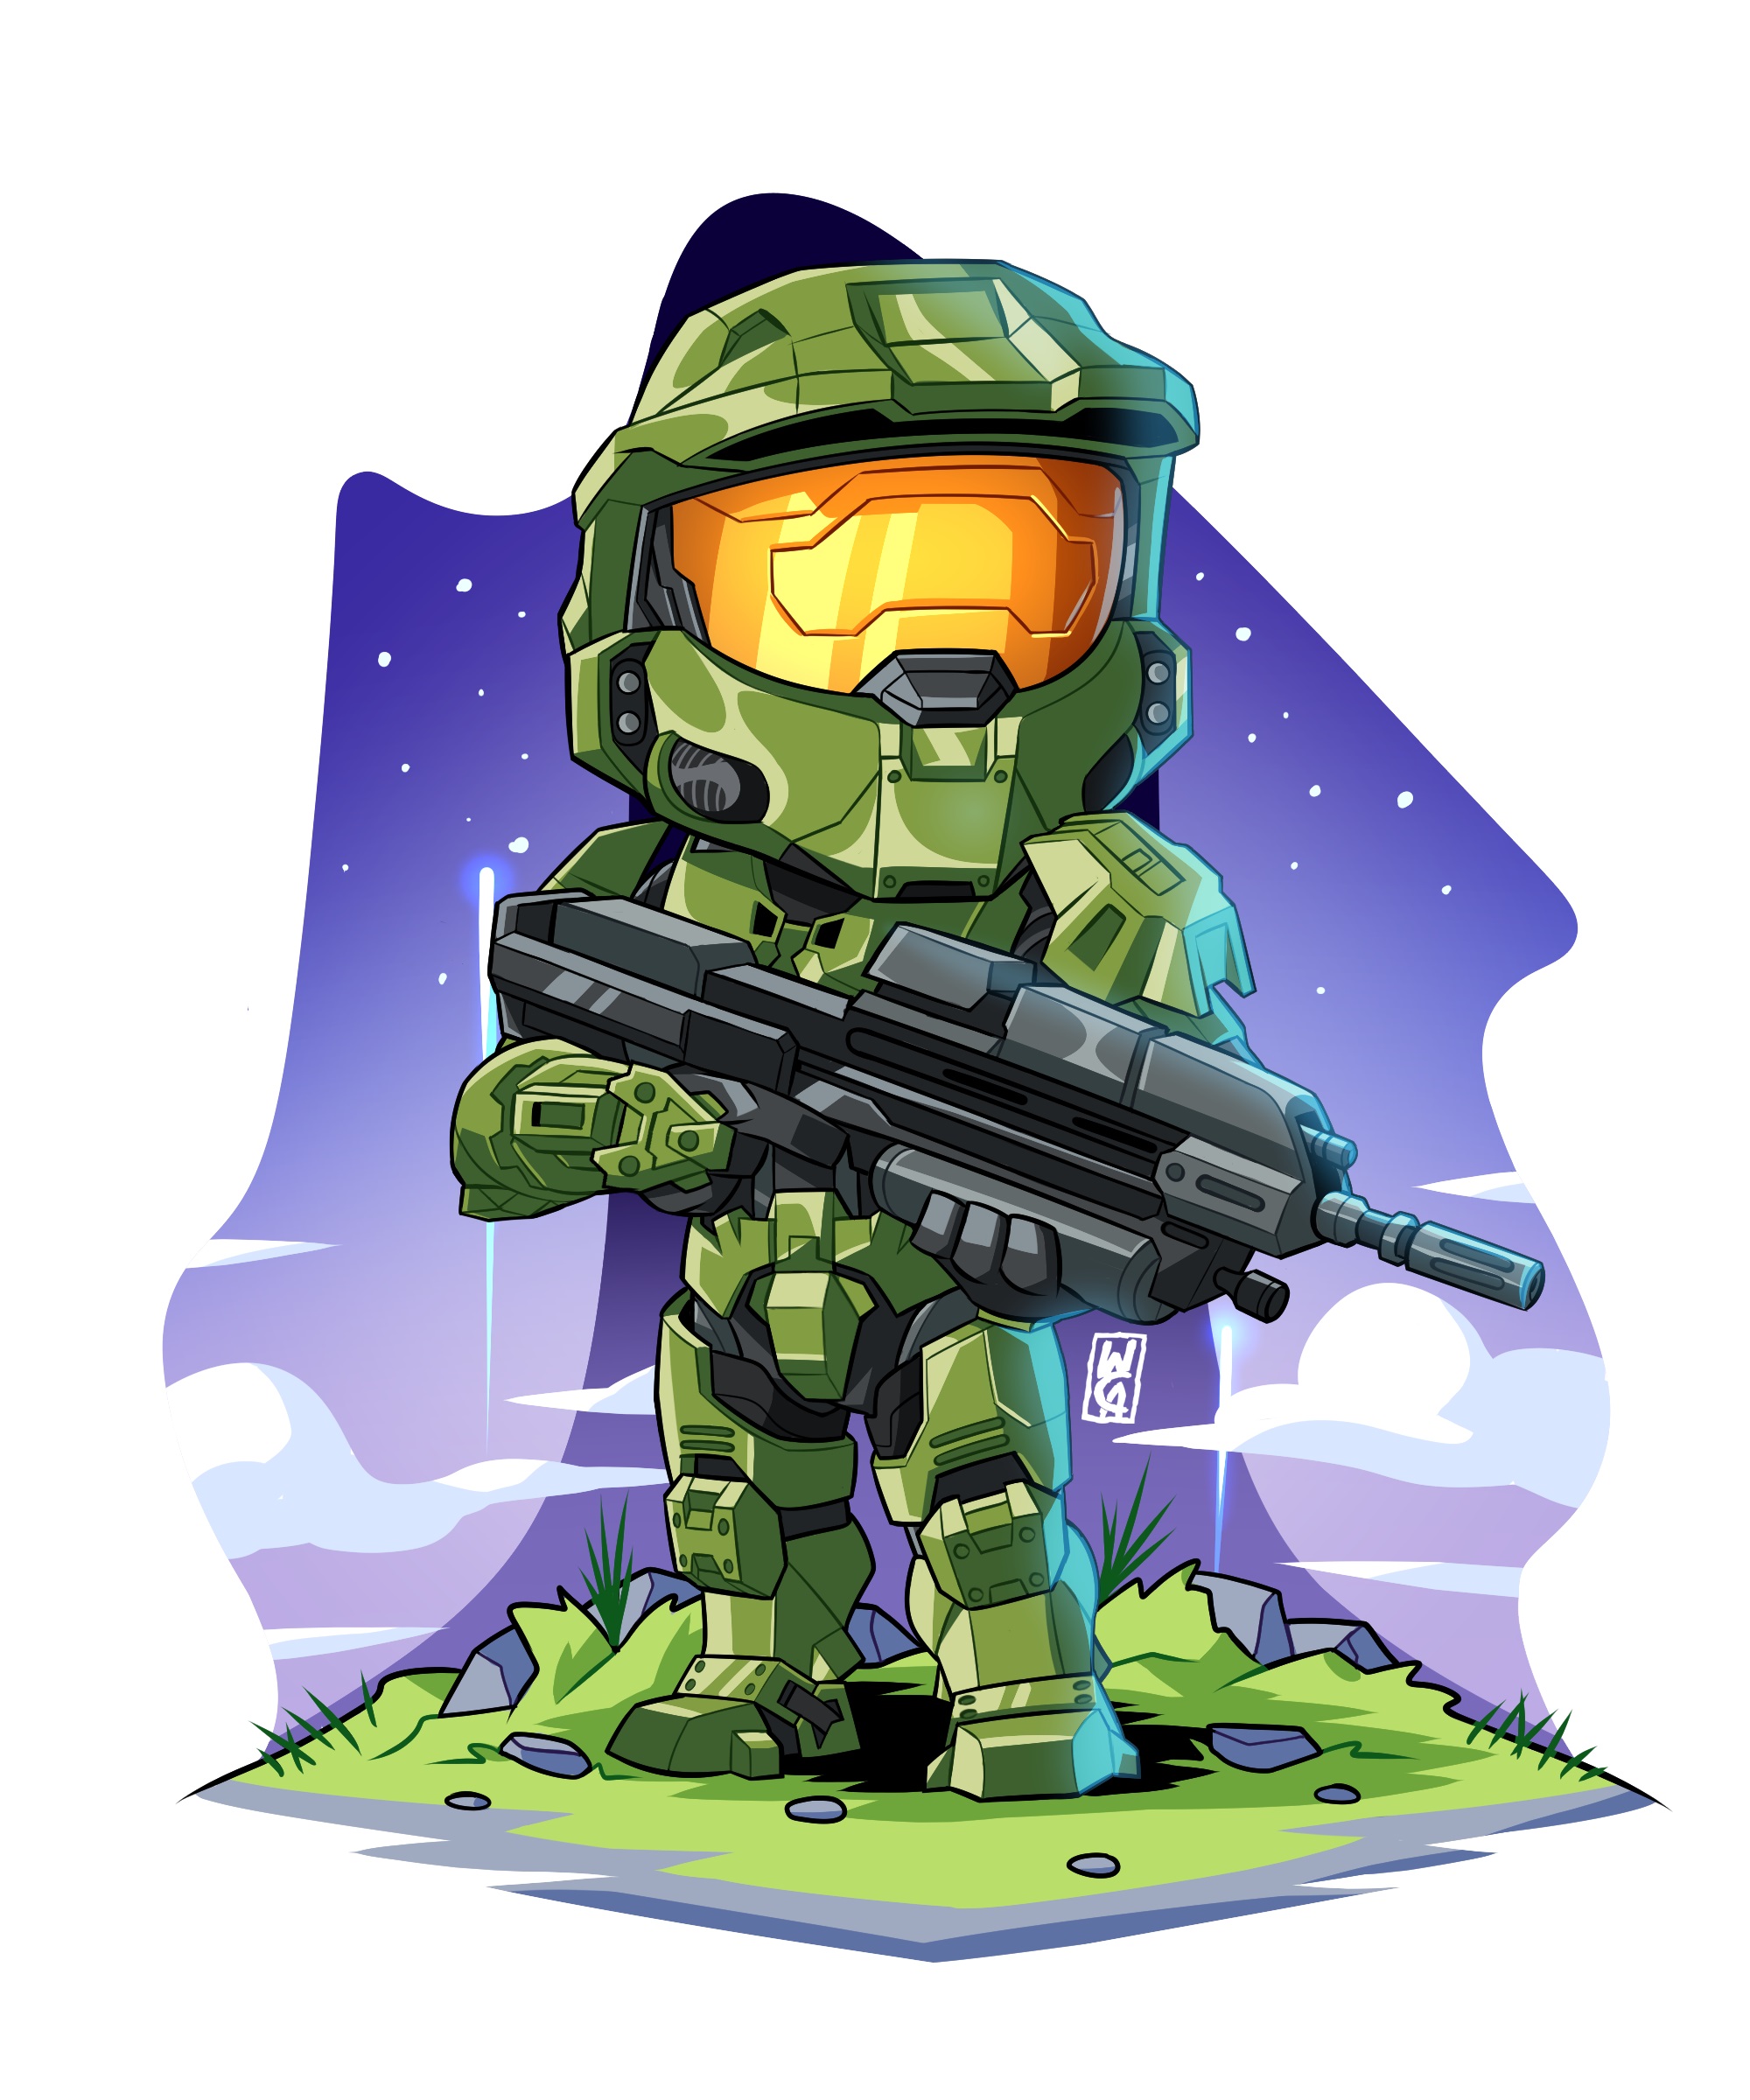 Master Chief art by Will Clements